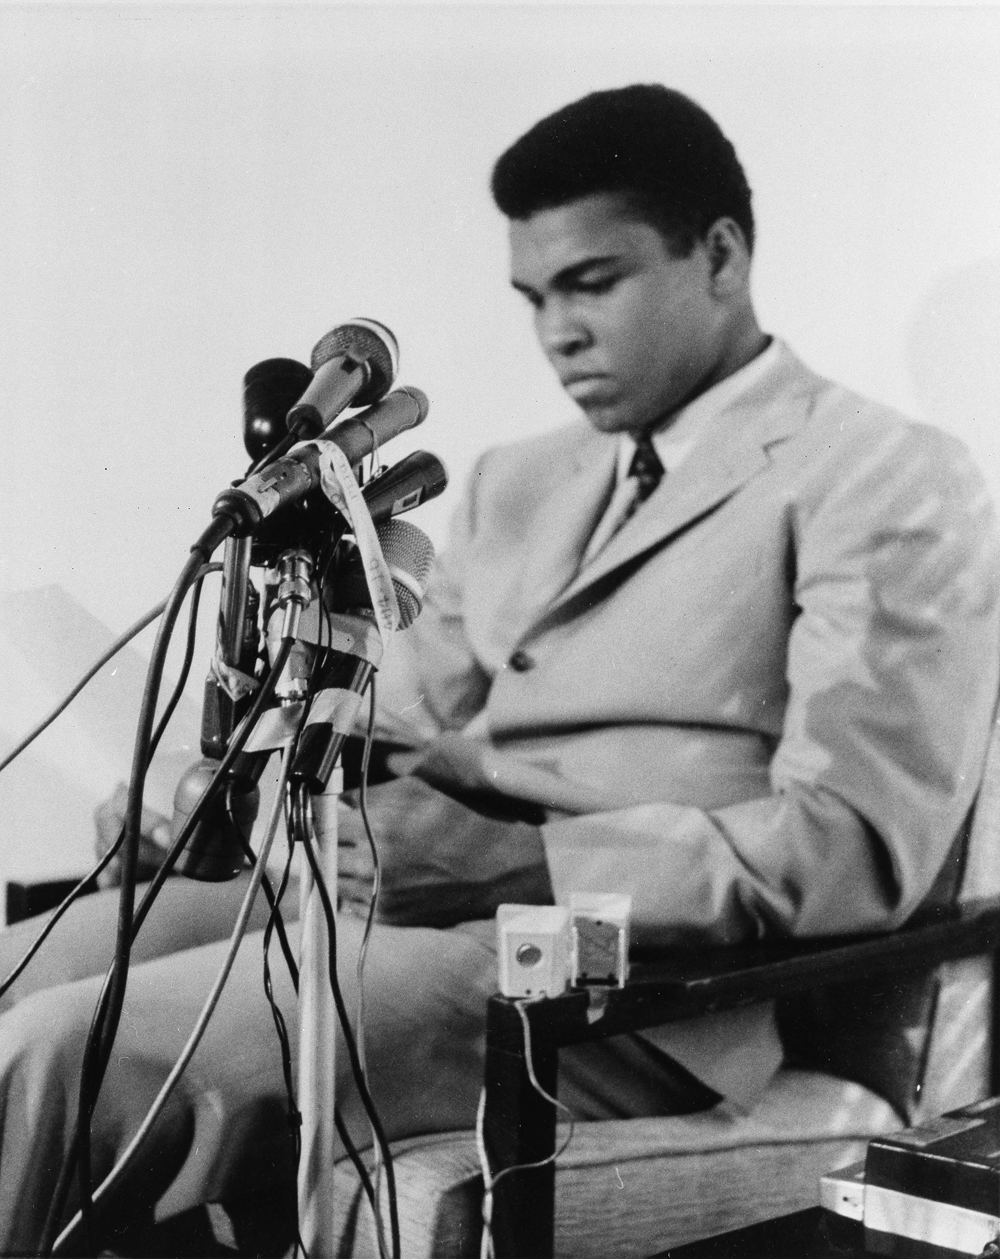 Muhammad Ali is seen at a news conference in Louisville, Kentucky, April 20, 1967, to say he will not accept miltary service of any nature when he is called for induction In Houston on April 28. He said "I ain't got no quarrel with them Viet Cong," and that the real enemy of his people "is right here" and not in Vietnam or anywhere else. (AP Photo)